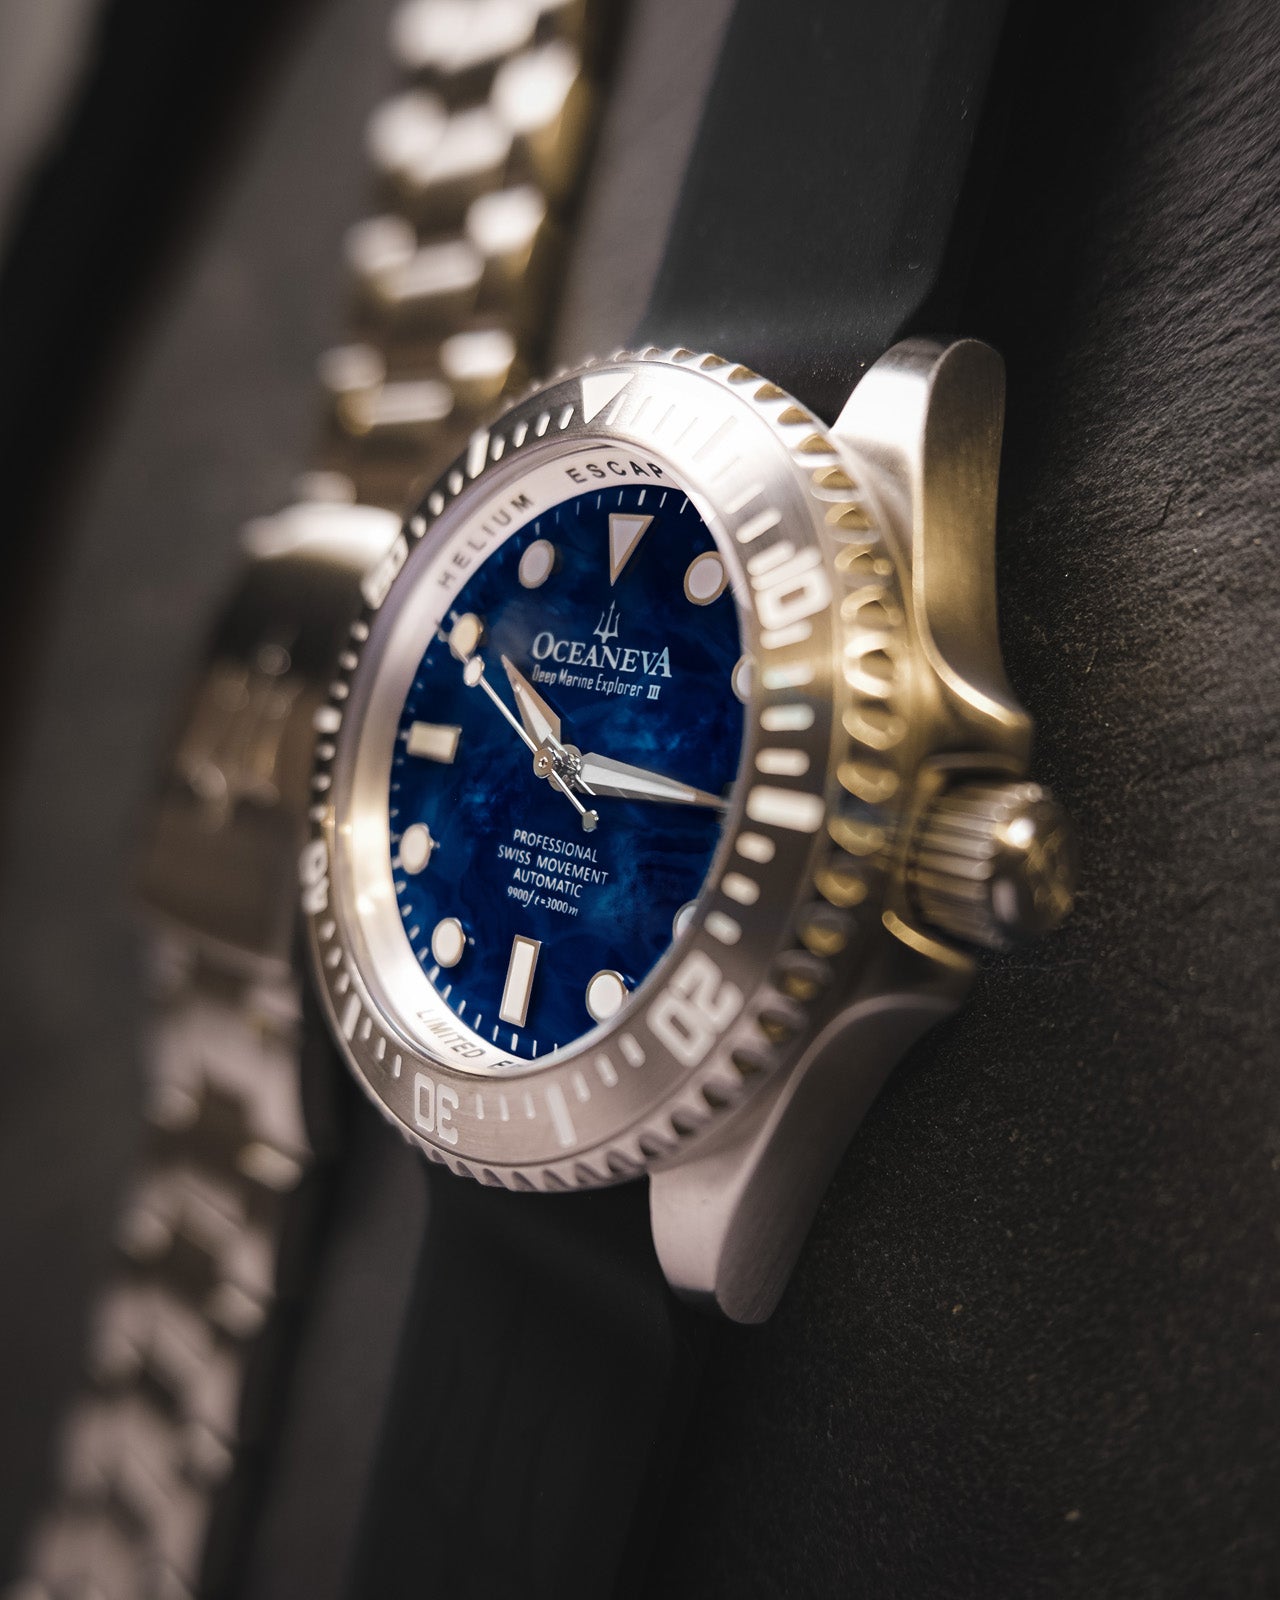 OceanicTime: DEEP BLUE Mechanical SKELETON Divers [find your inner glow]